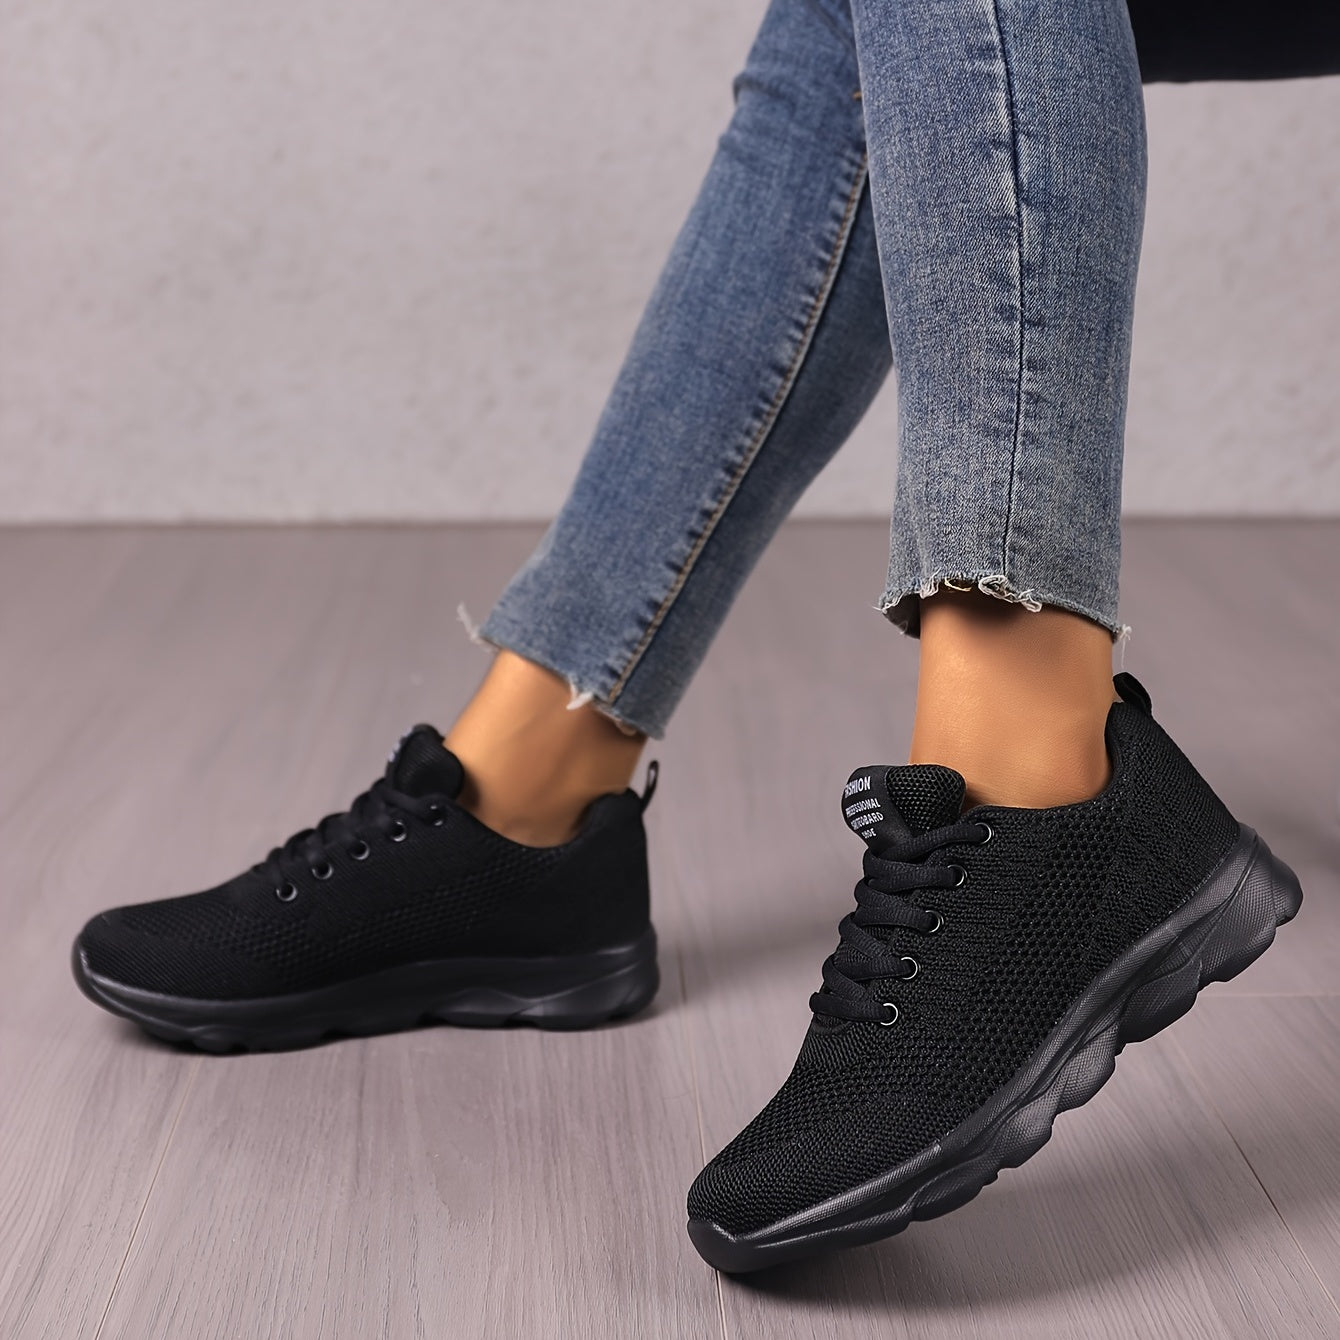 「lovevop」Women's Knit Sneakers, Lightweight Casual Breathable Running Shoes